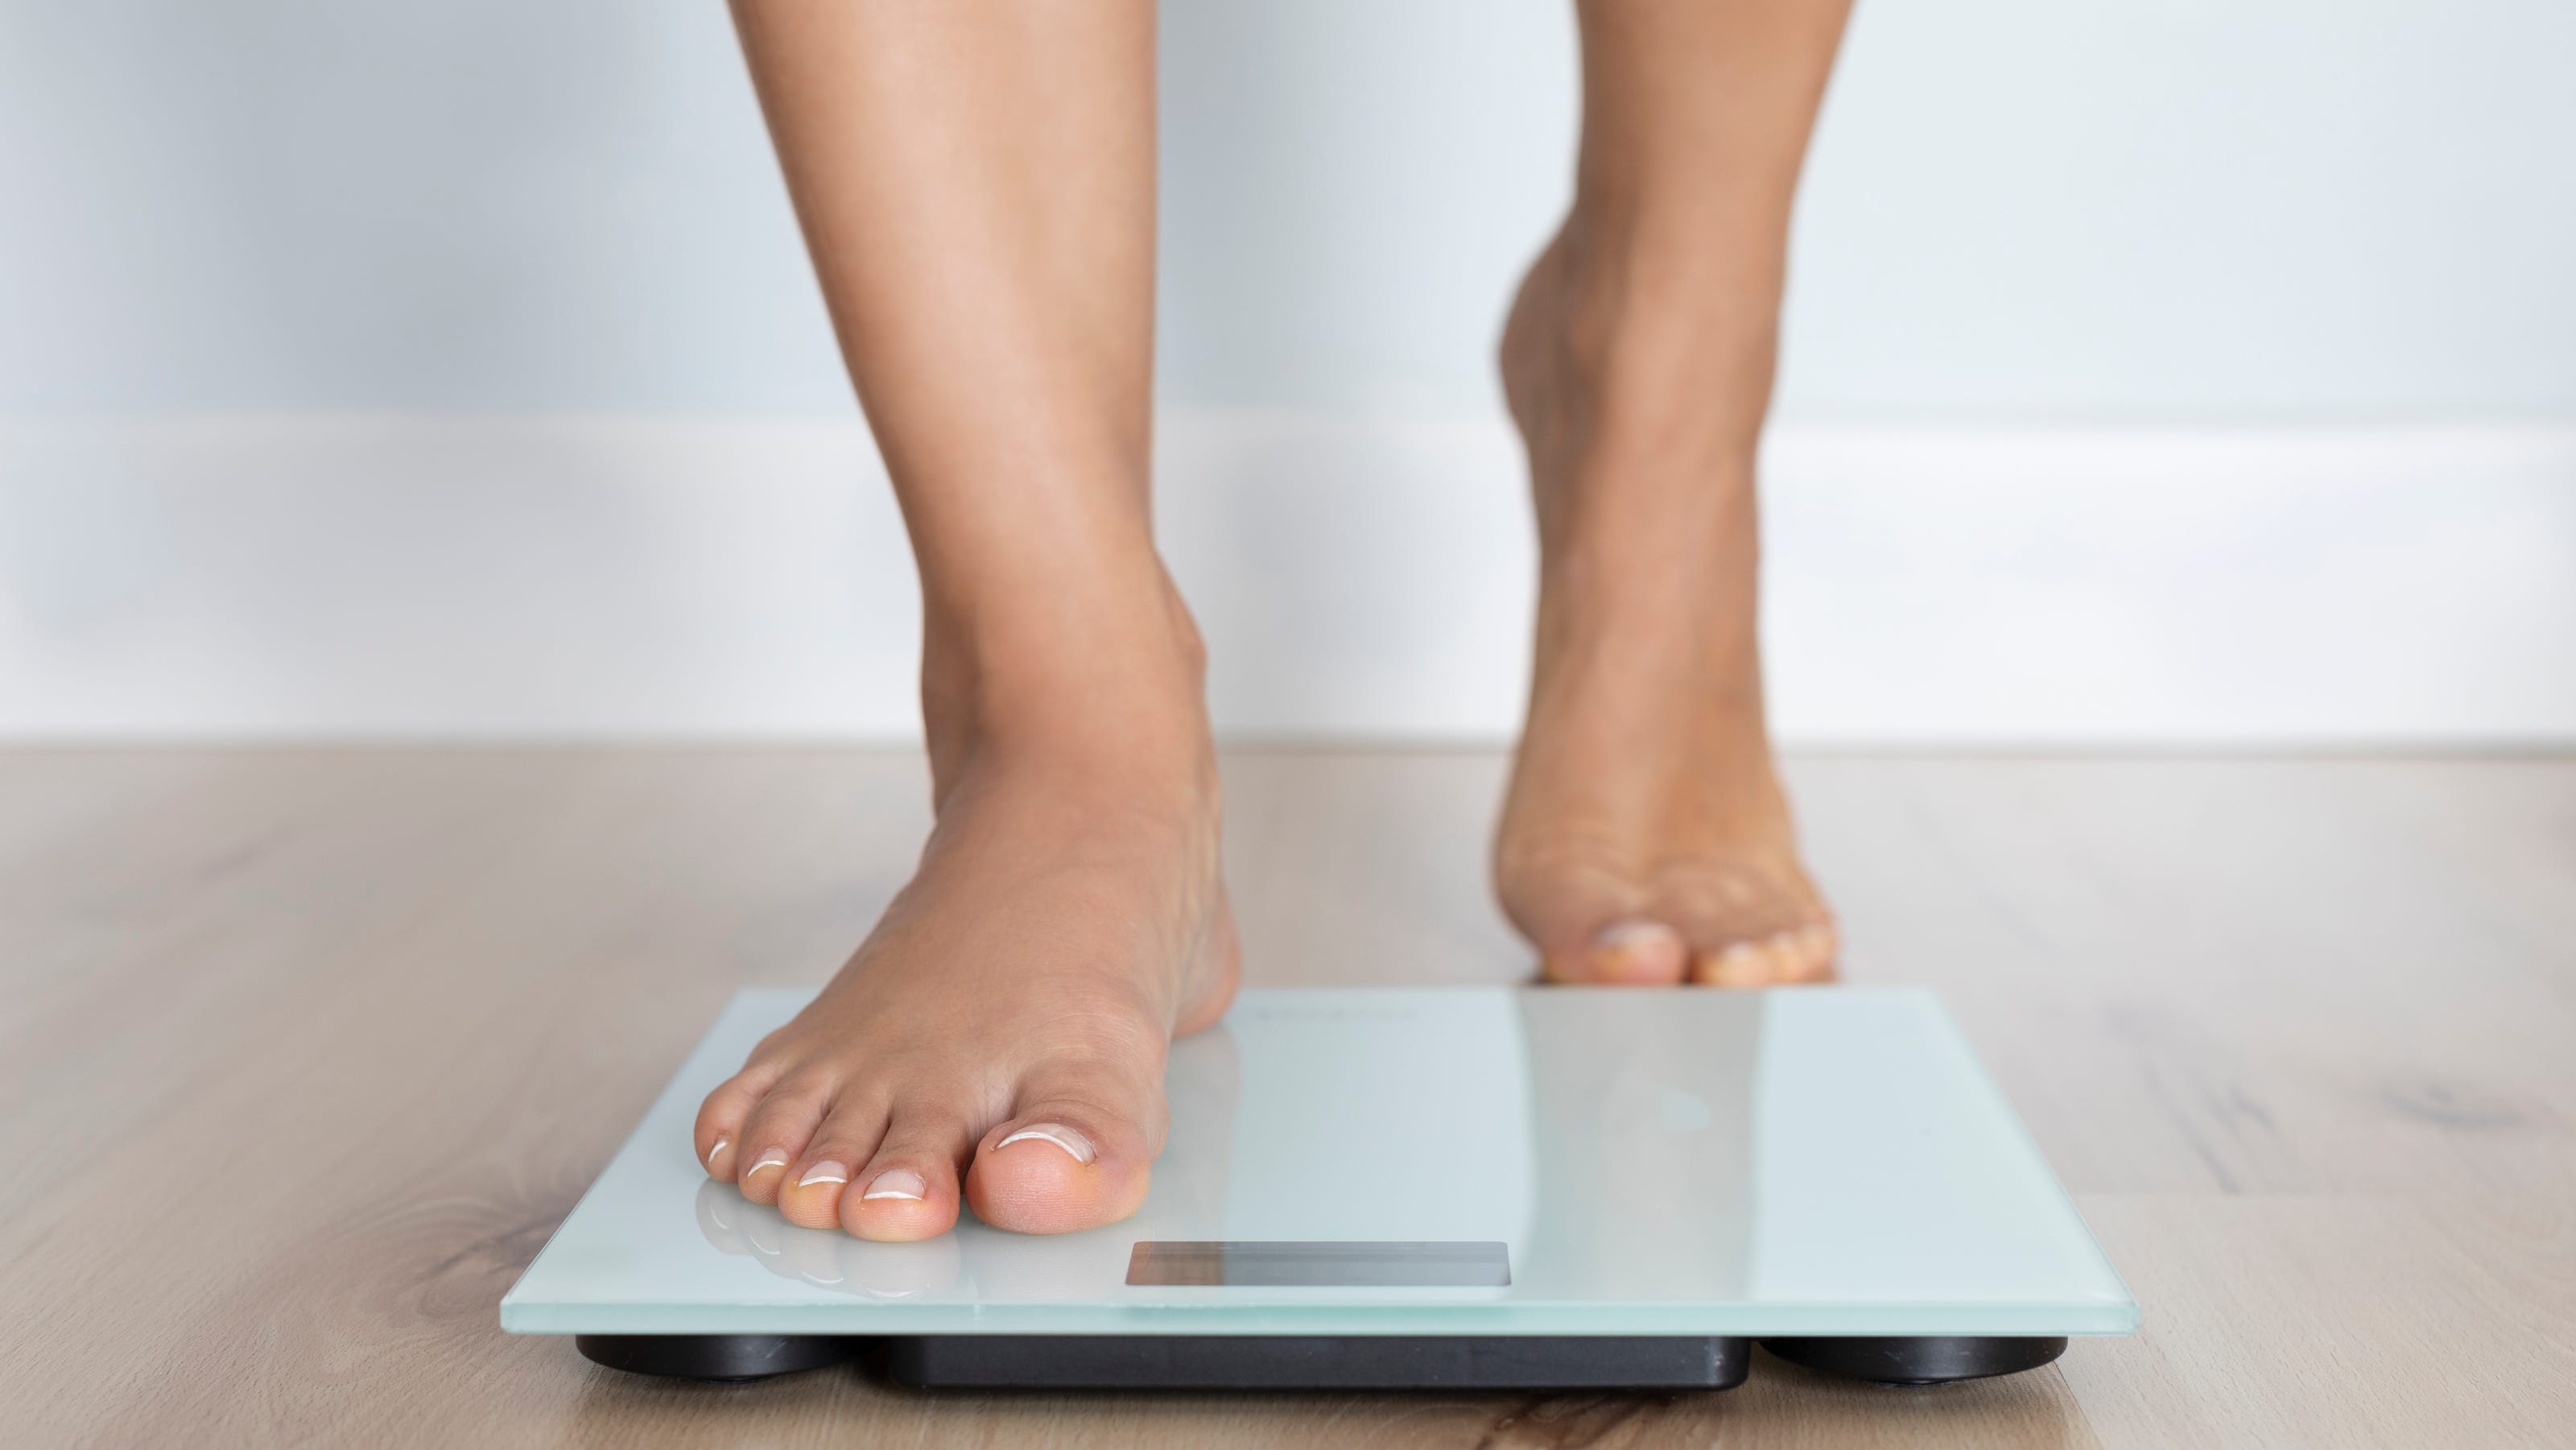 New Year S Resolutions Focused On Weight Loss May Actually Harm Health